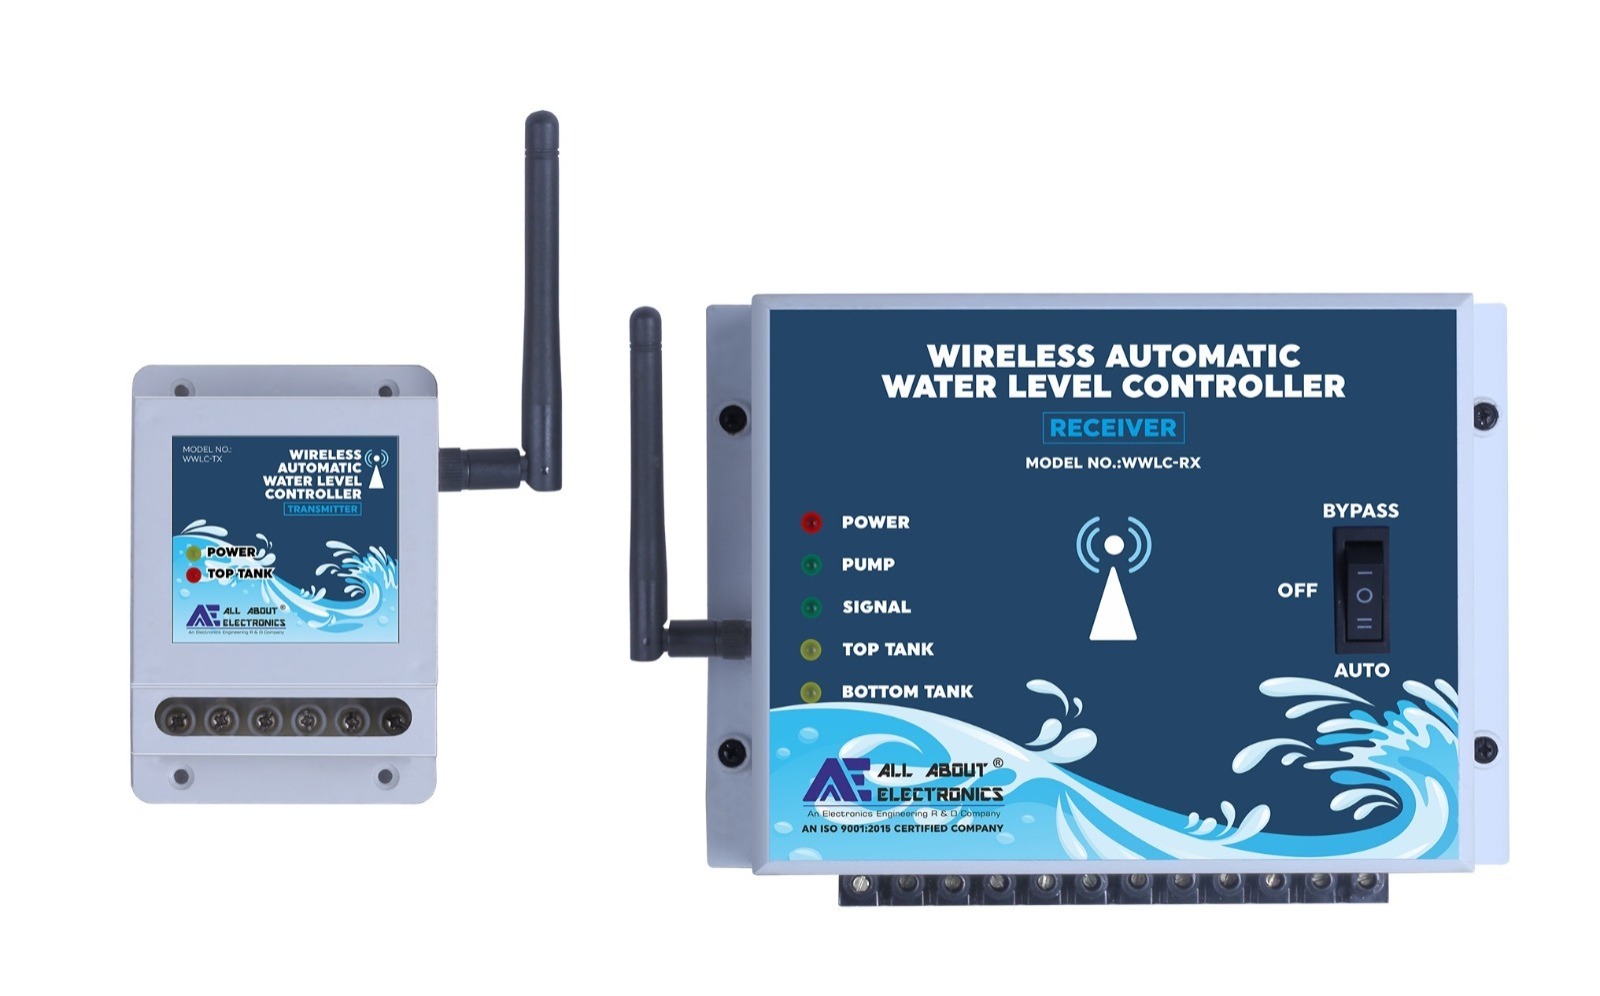 Wireless Automatic Water Level Controller Model No.WWLC-TX/RX - Three Phase